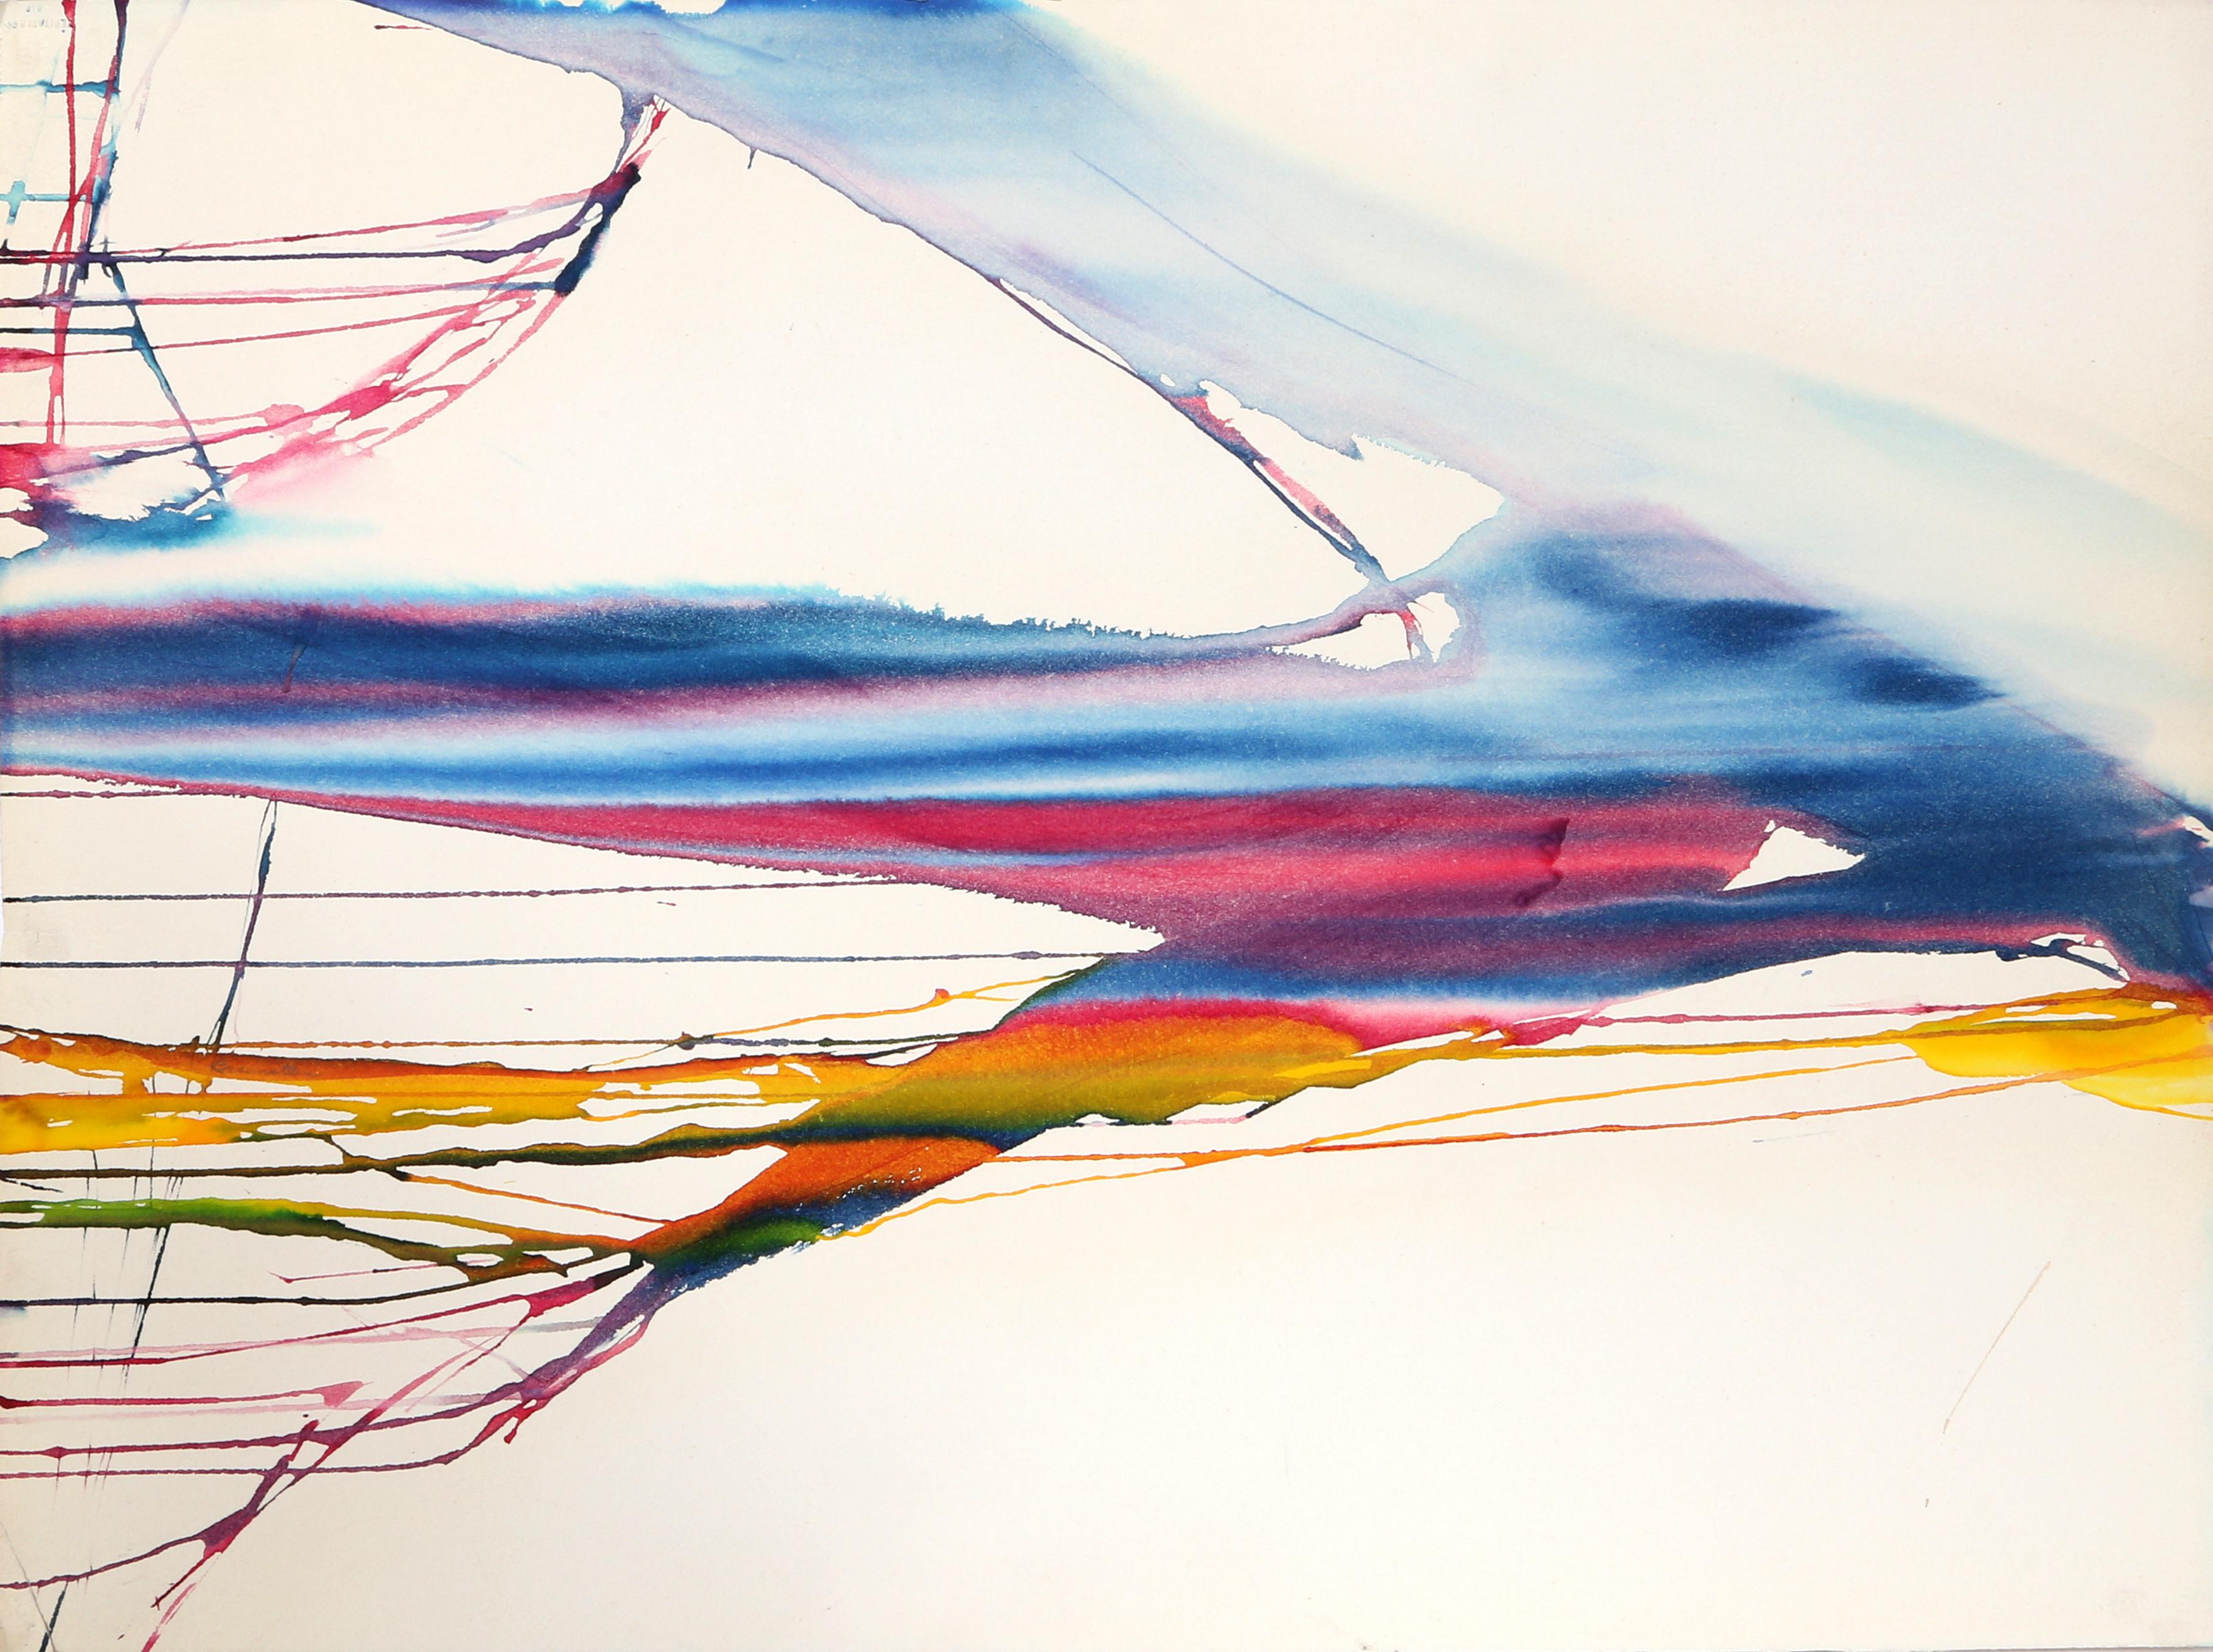 Several bold streaks of ink rush across the page as if dripping off the wings of a bird in flight. This unique watercolor by Geri Taper is signed and titled by the artist.

Soaring Storm
Geri Taper, American (1929–2004)
Date: 1971
Ink on Arches,